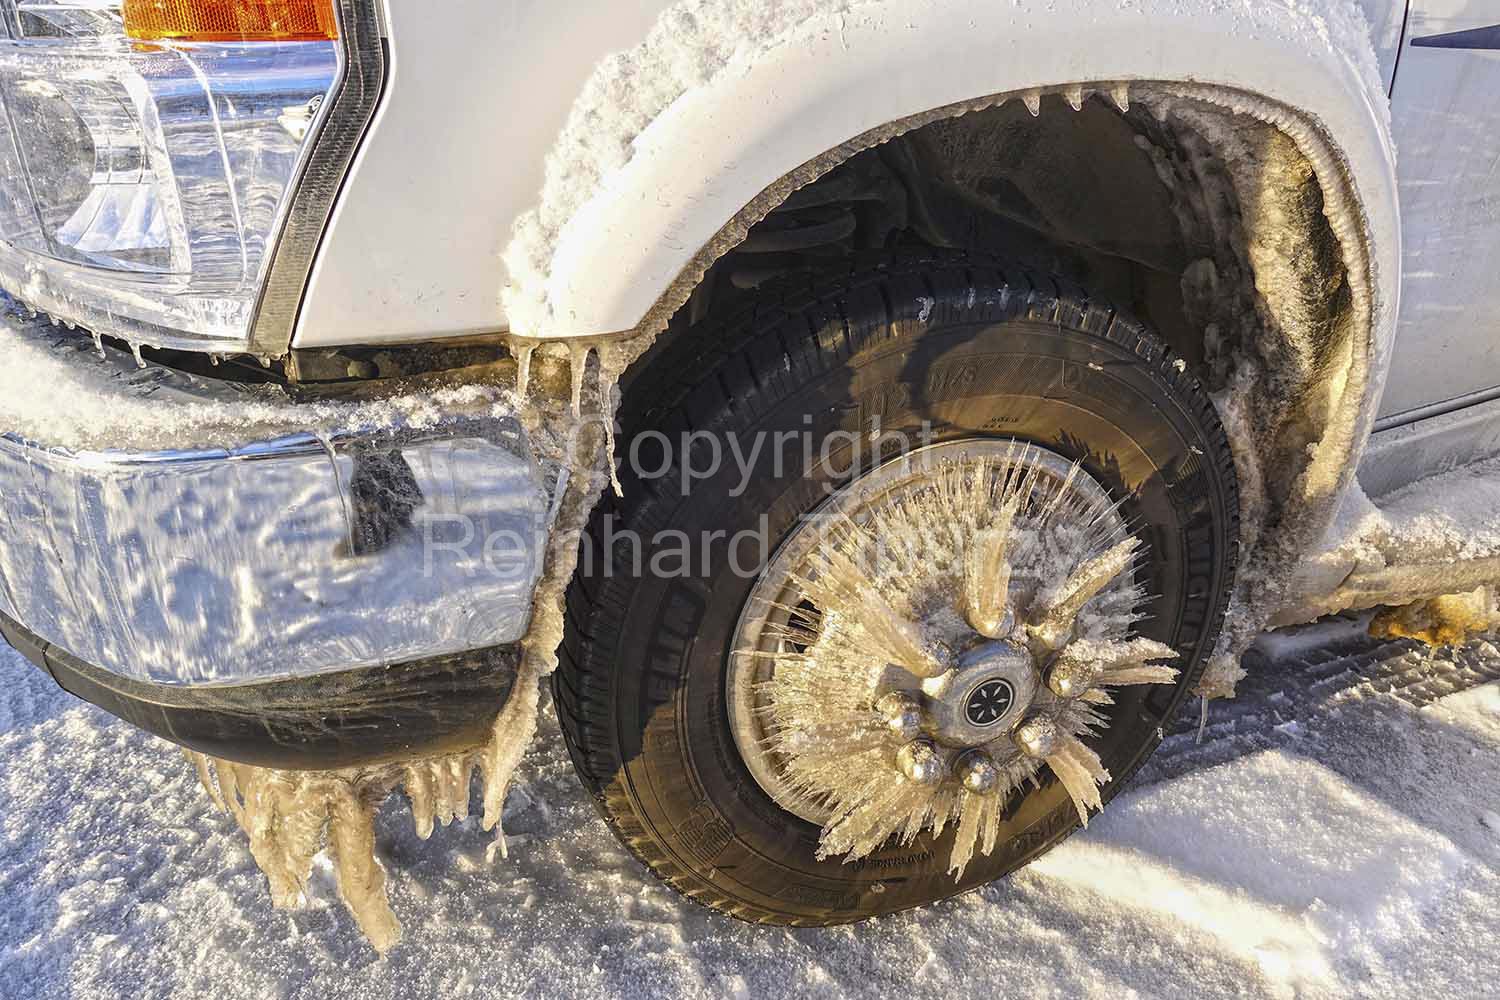 ice_formation_on_tire_Icefields_Parkway_Canada